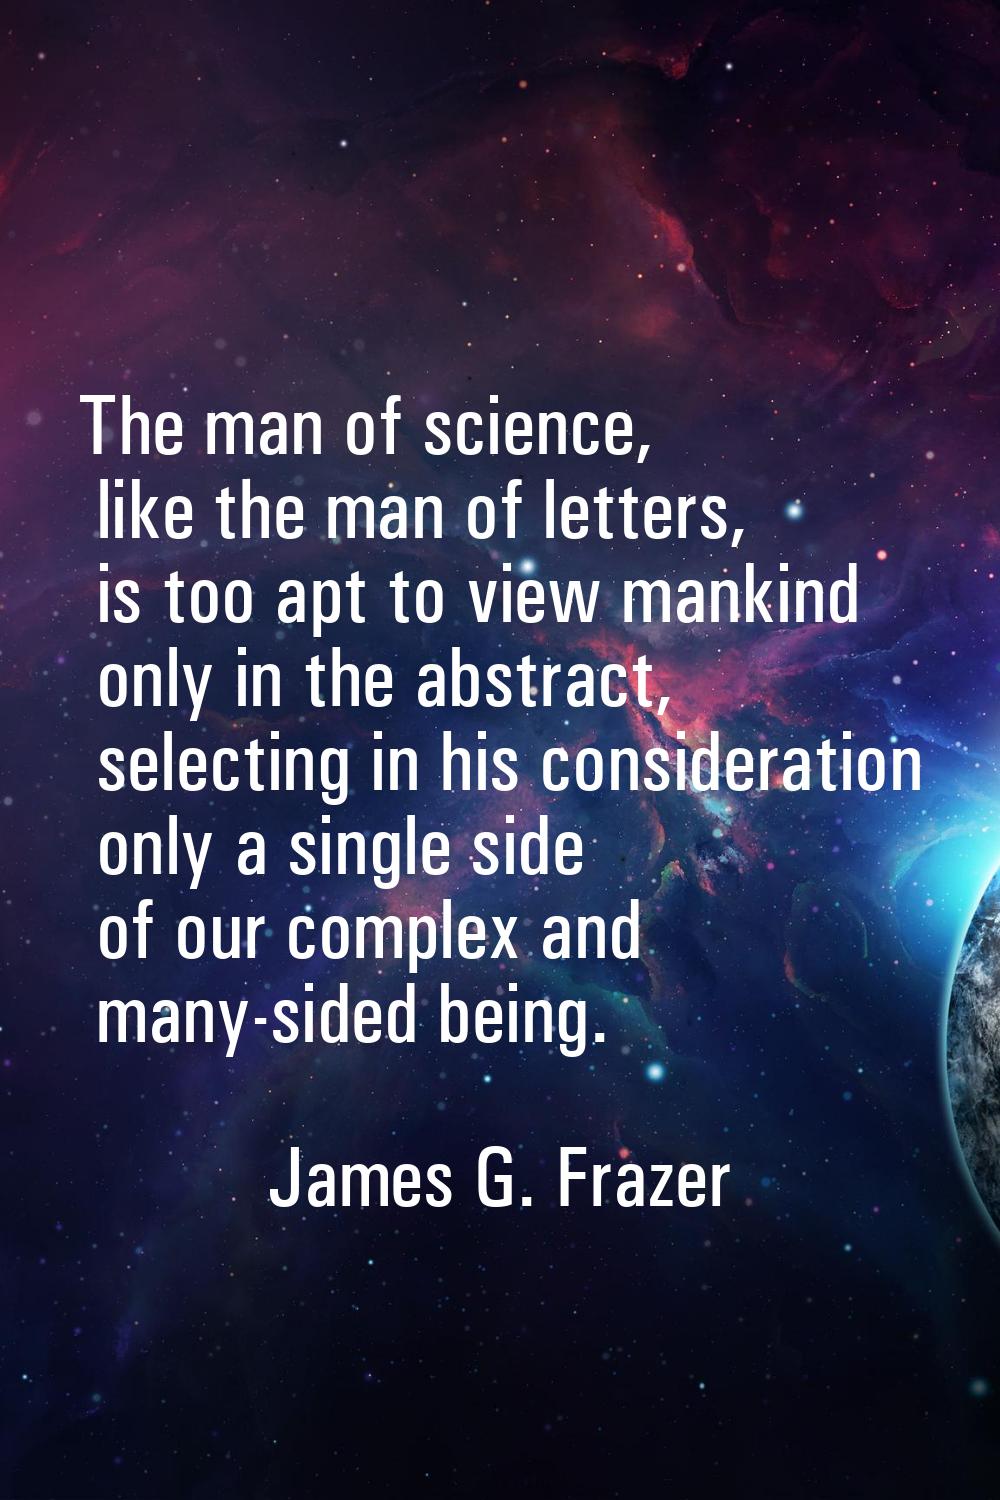 The man of science, like the man of letters, is too apt to view mankind only in the abstract, selec